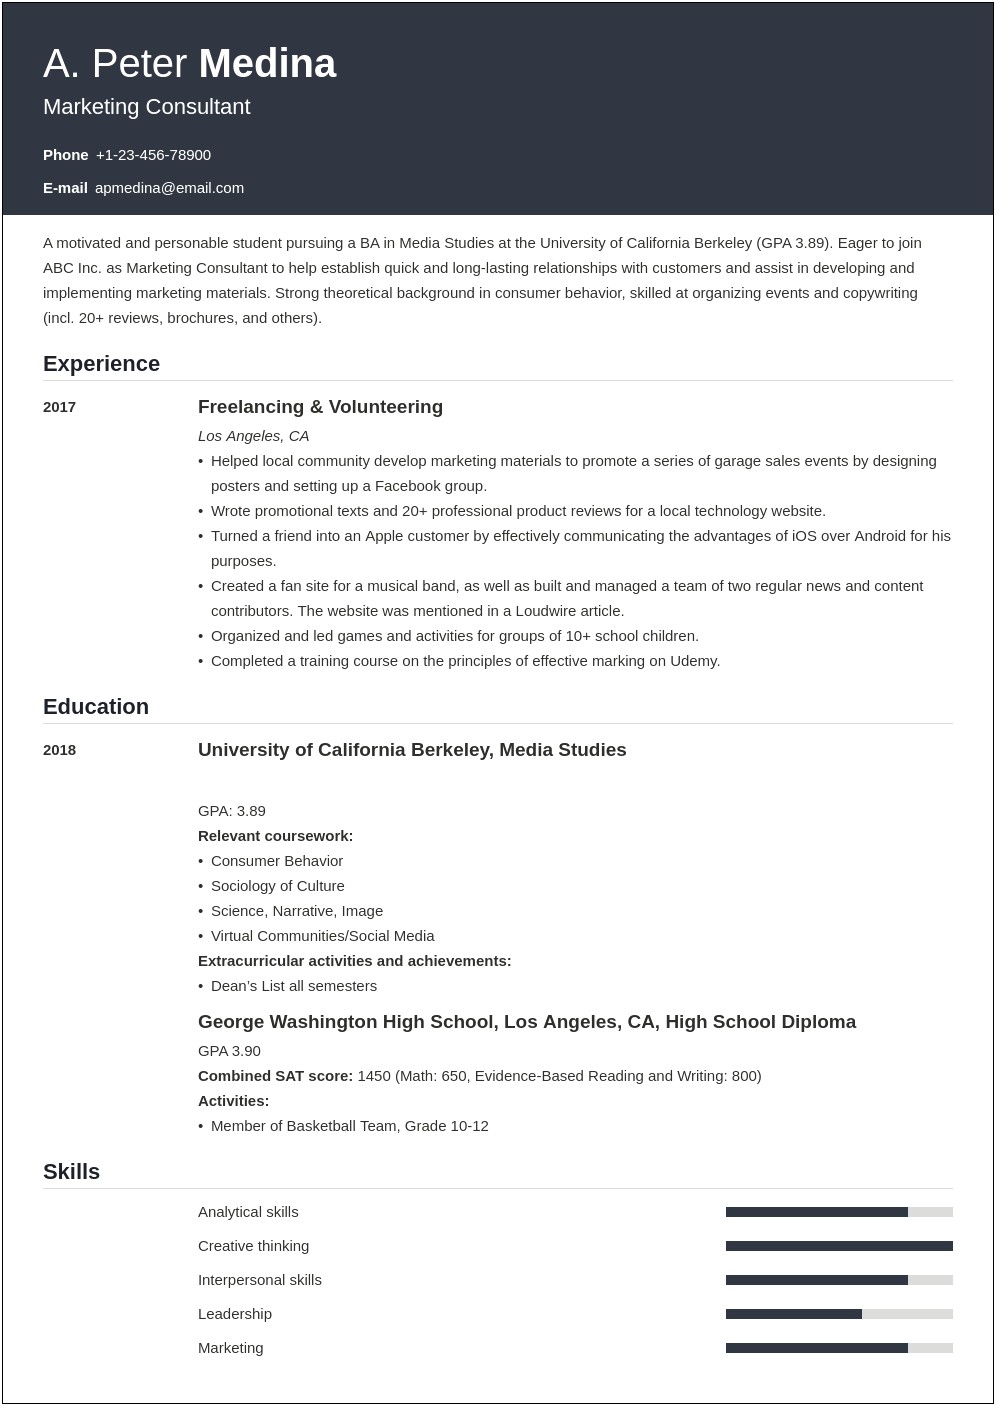 Resume No Work Experience Objective